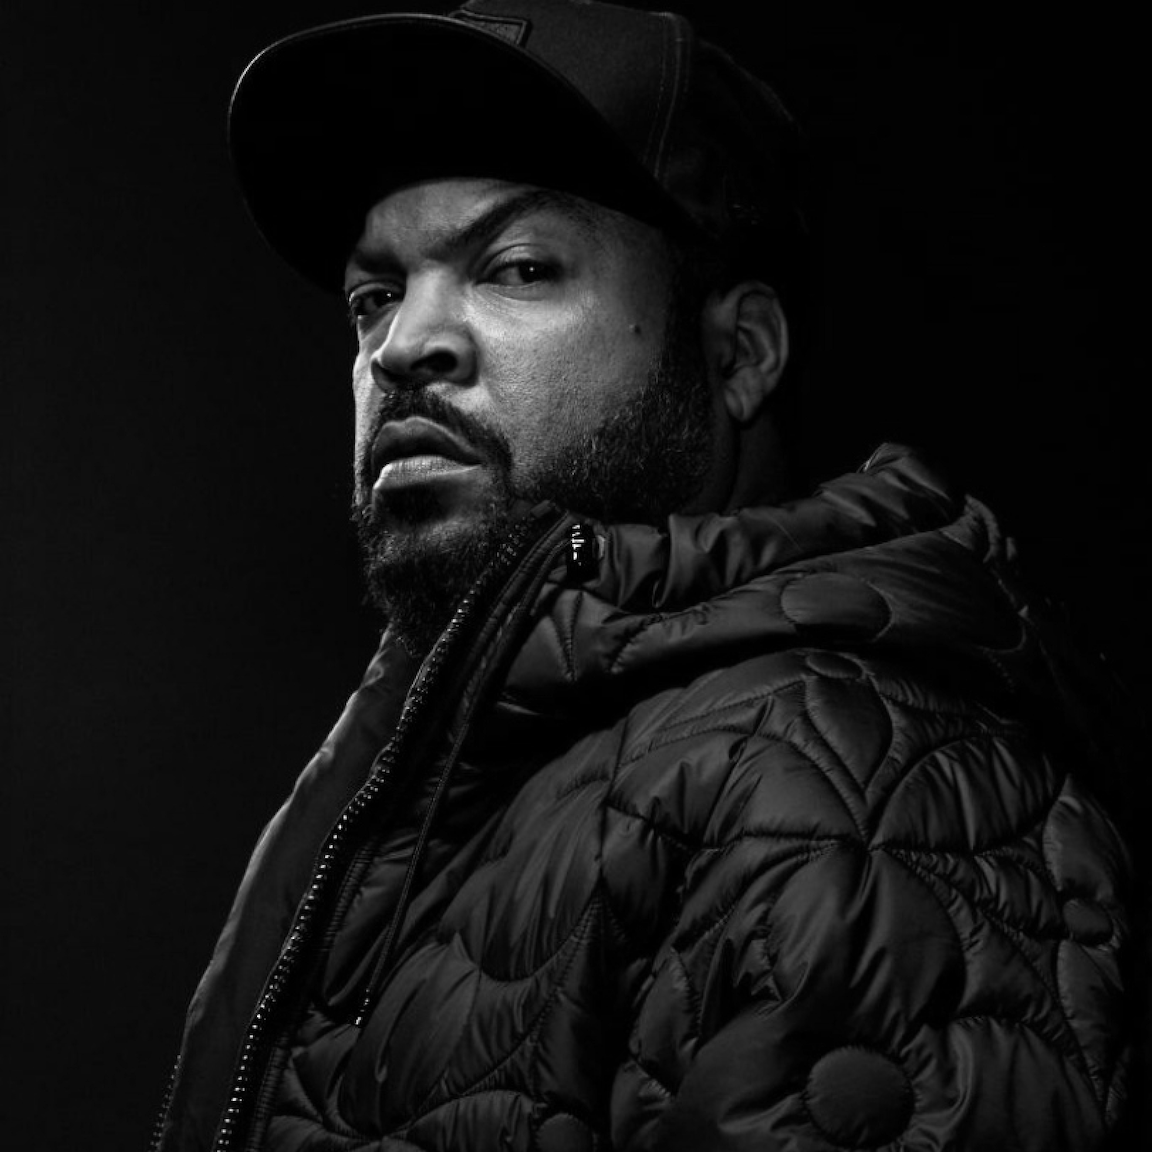 Ice Cube  Ice cube rapper, Ice cube nwa, Good looking men